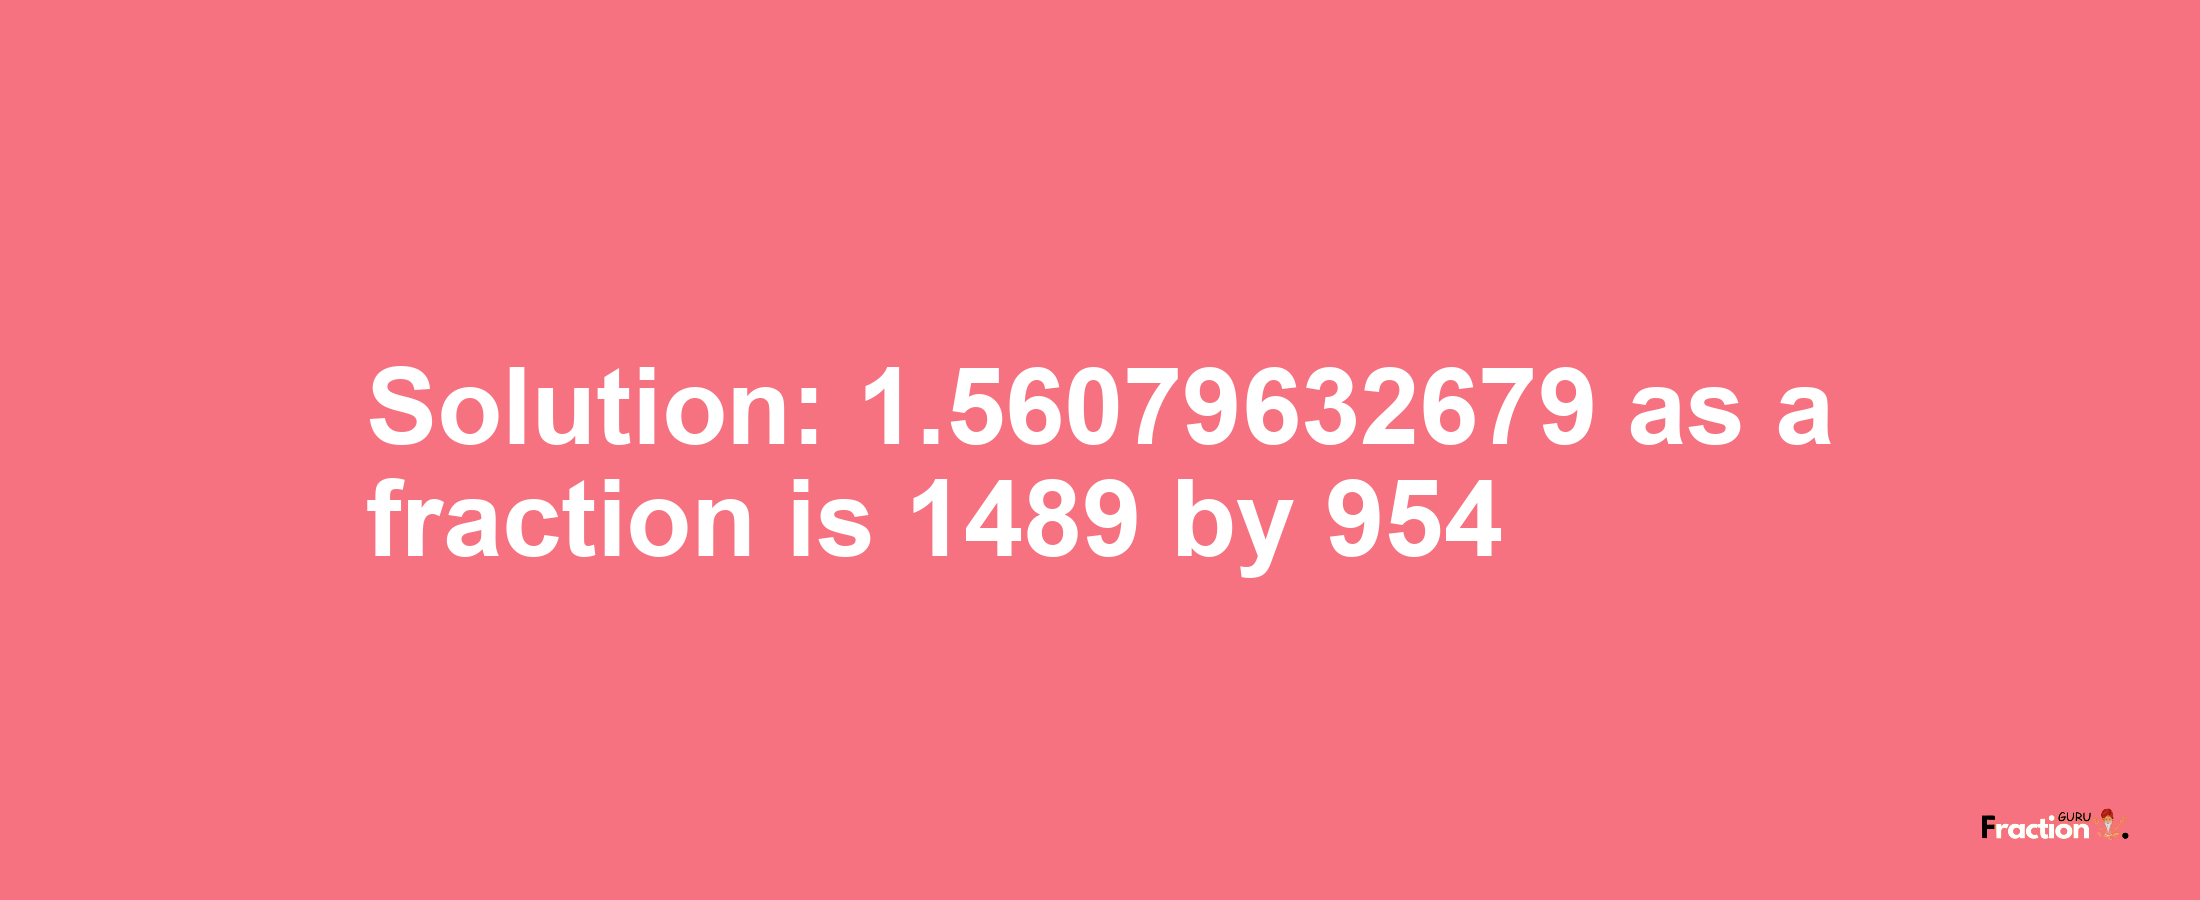 Solution:1.56079632679 as a fraction is 1489/954